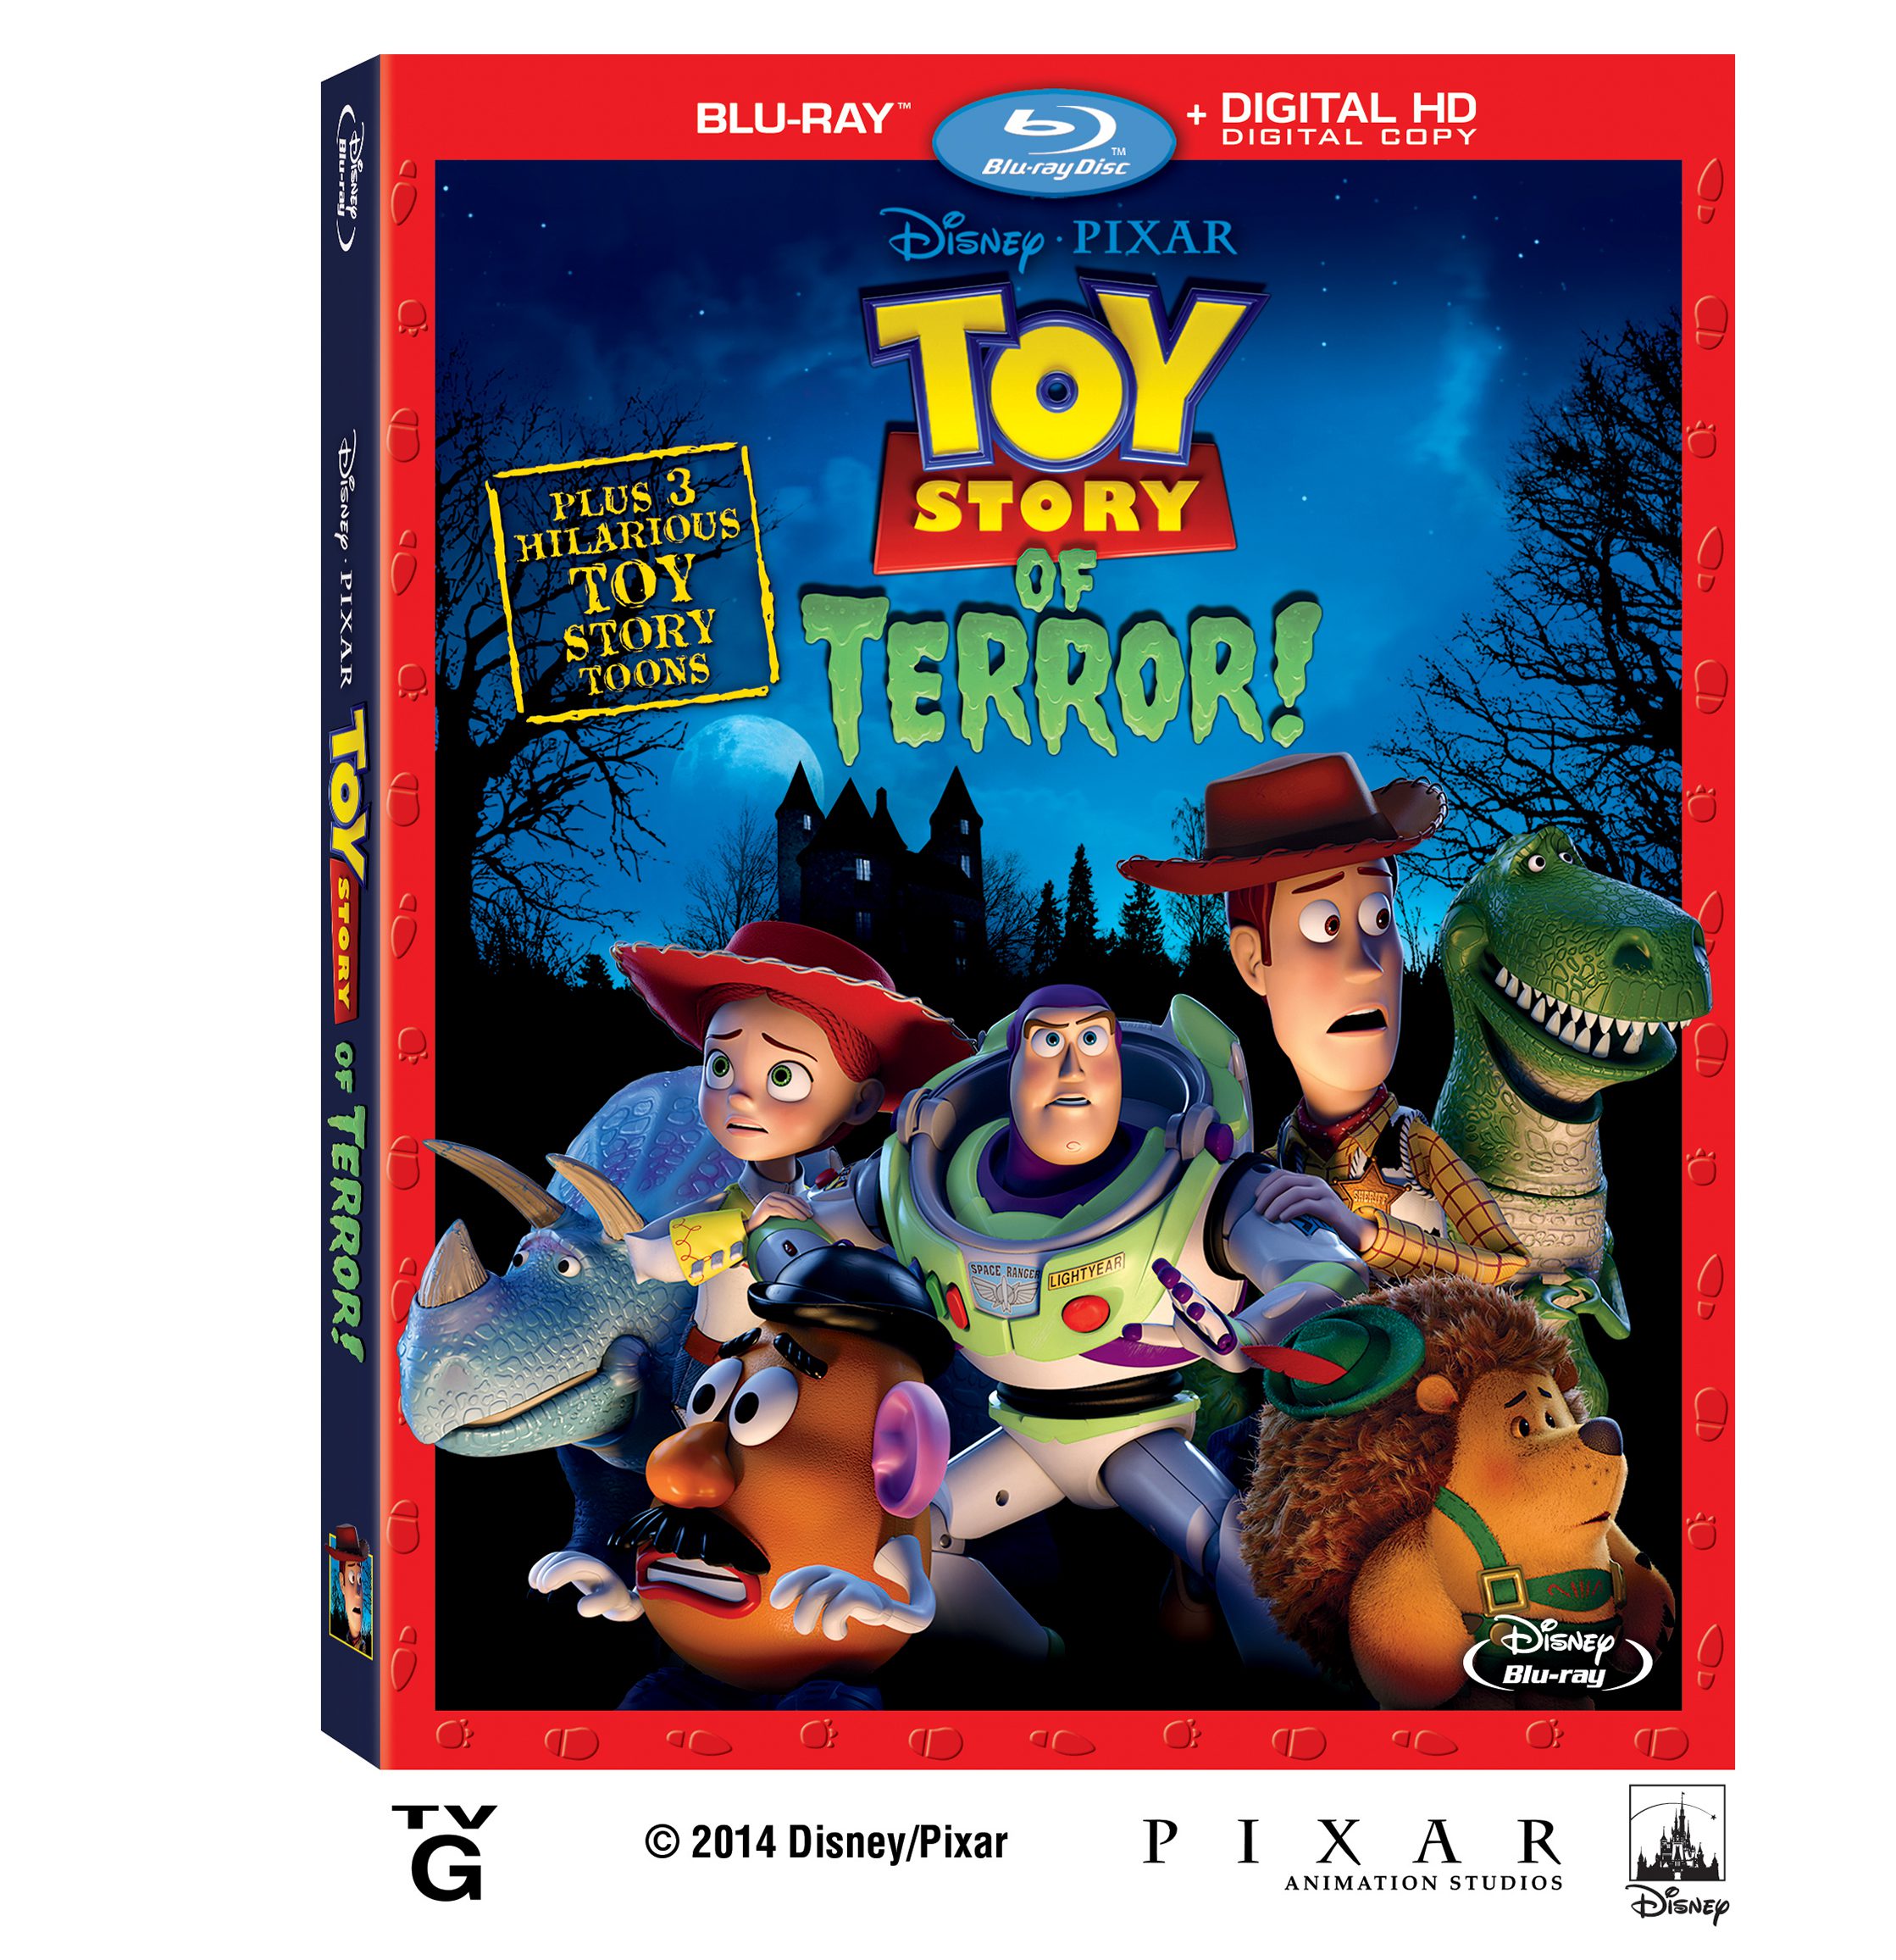 Toy Story of Terror on Blu-ray + Digital Copy, DVD and Digital HD August 19, 2014